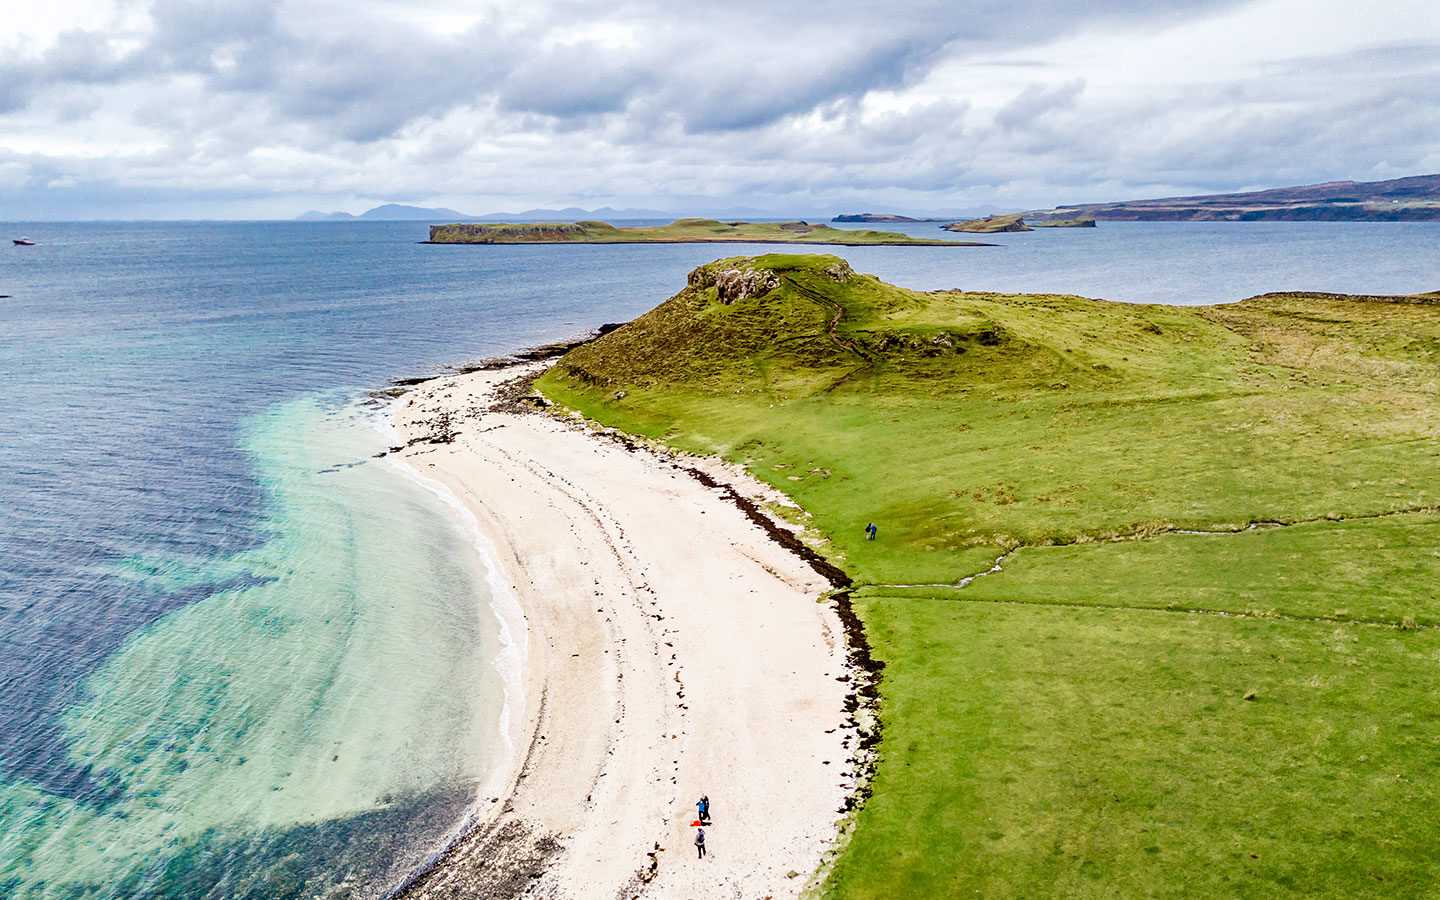 The white sands of Claigan Coral Beach in the north of the Isle of Skye